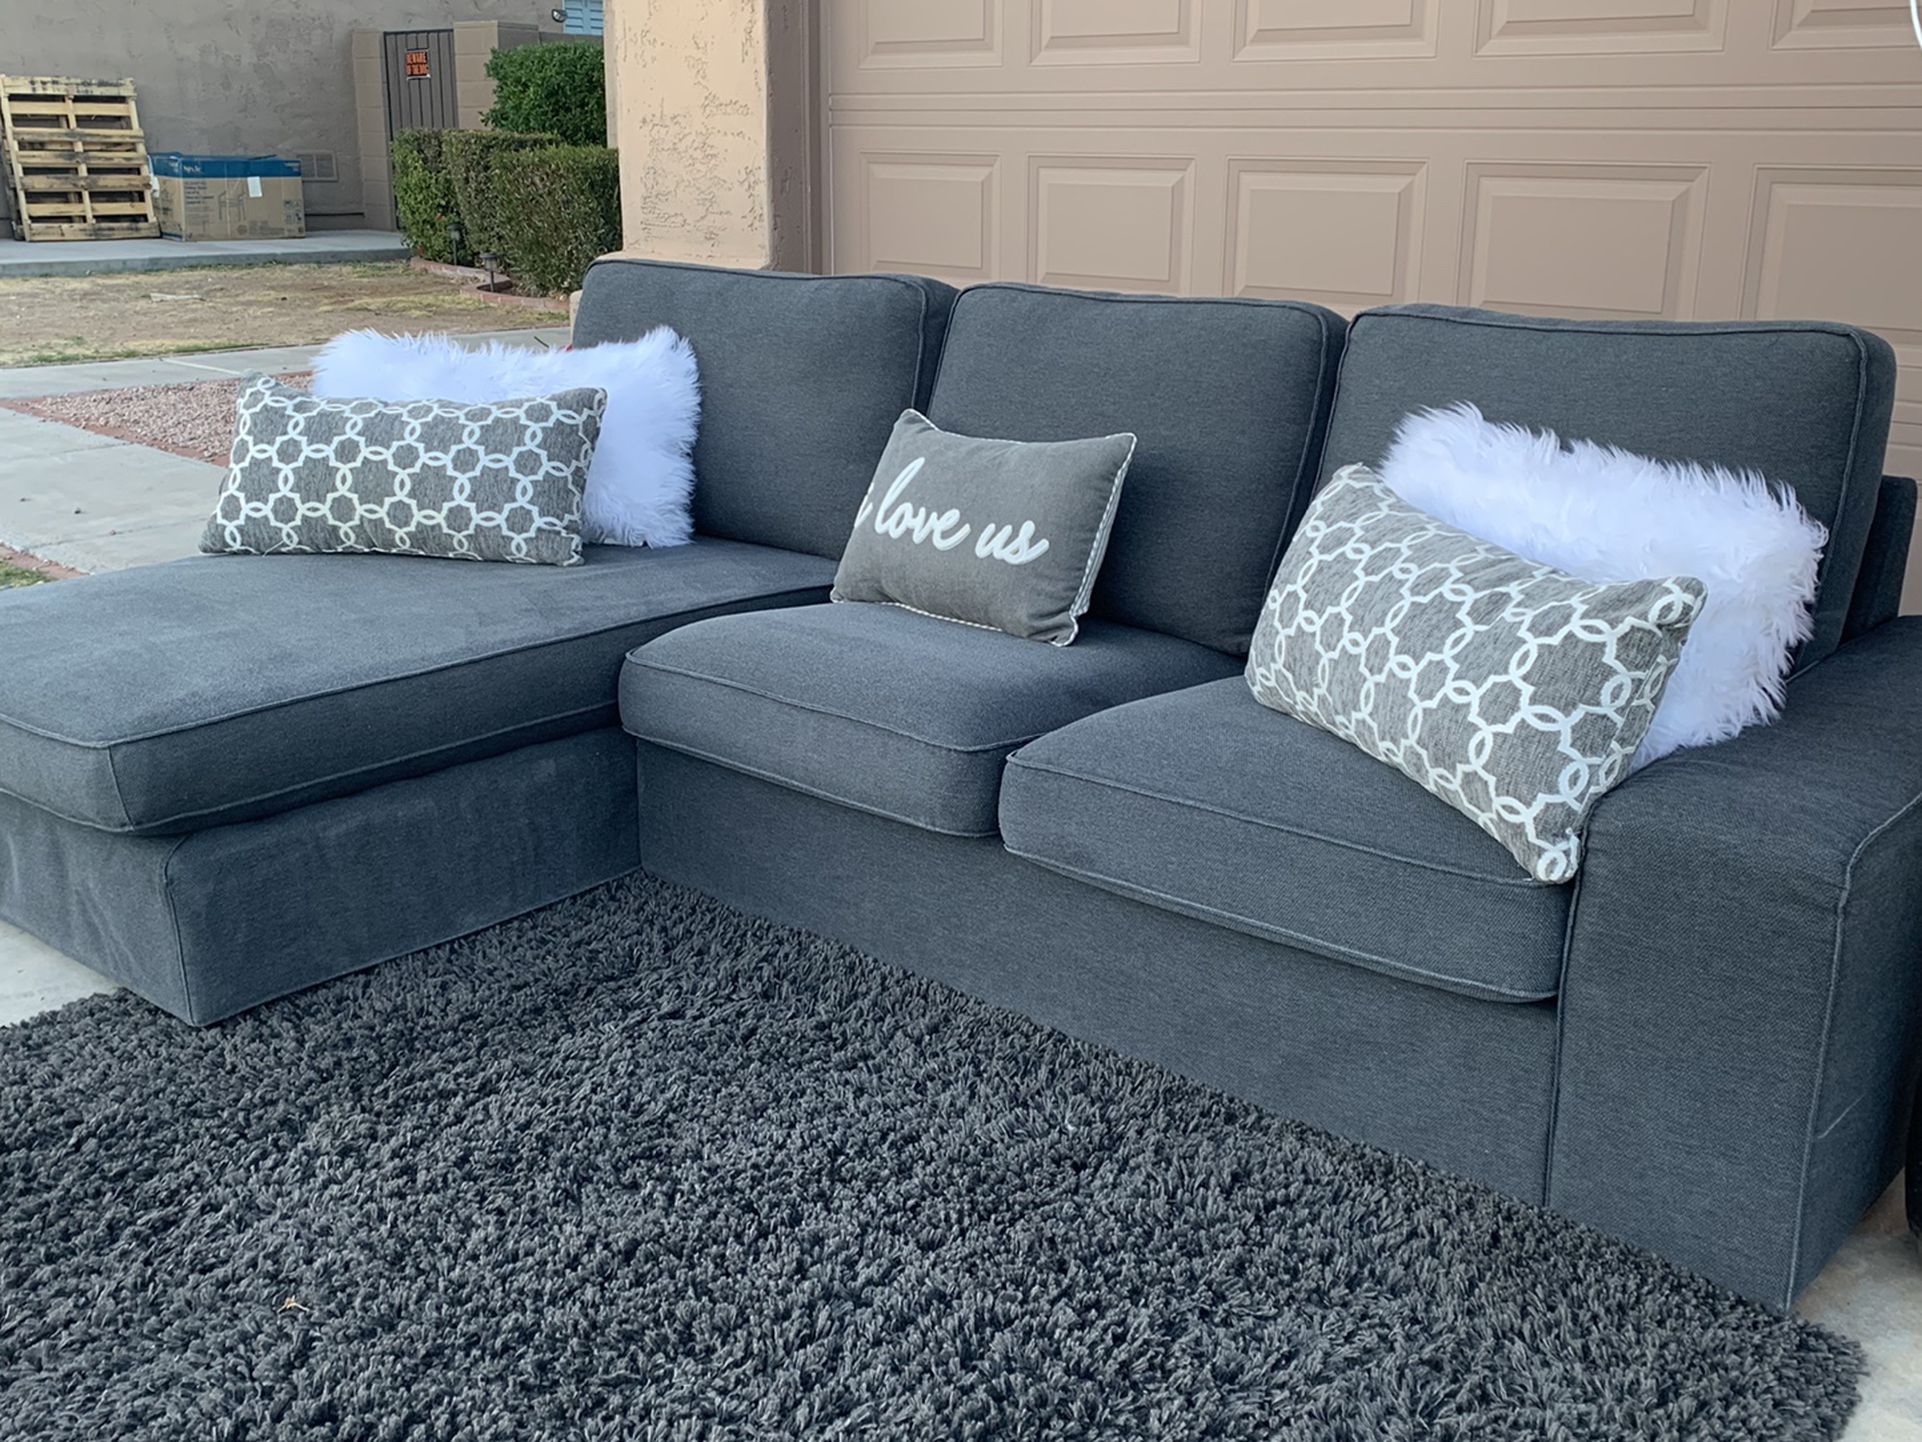 Dark Gray Ikea Kivik Two Piece Sectional *Pending Delivery*